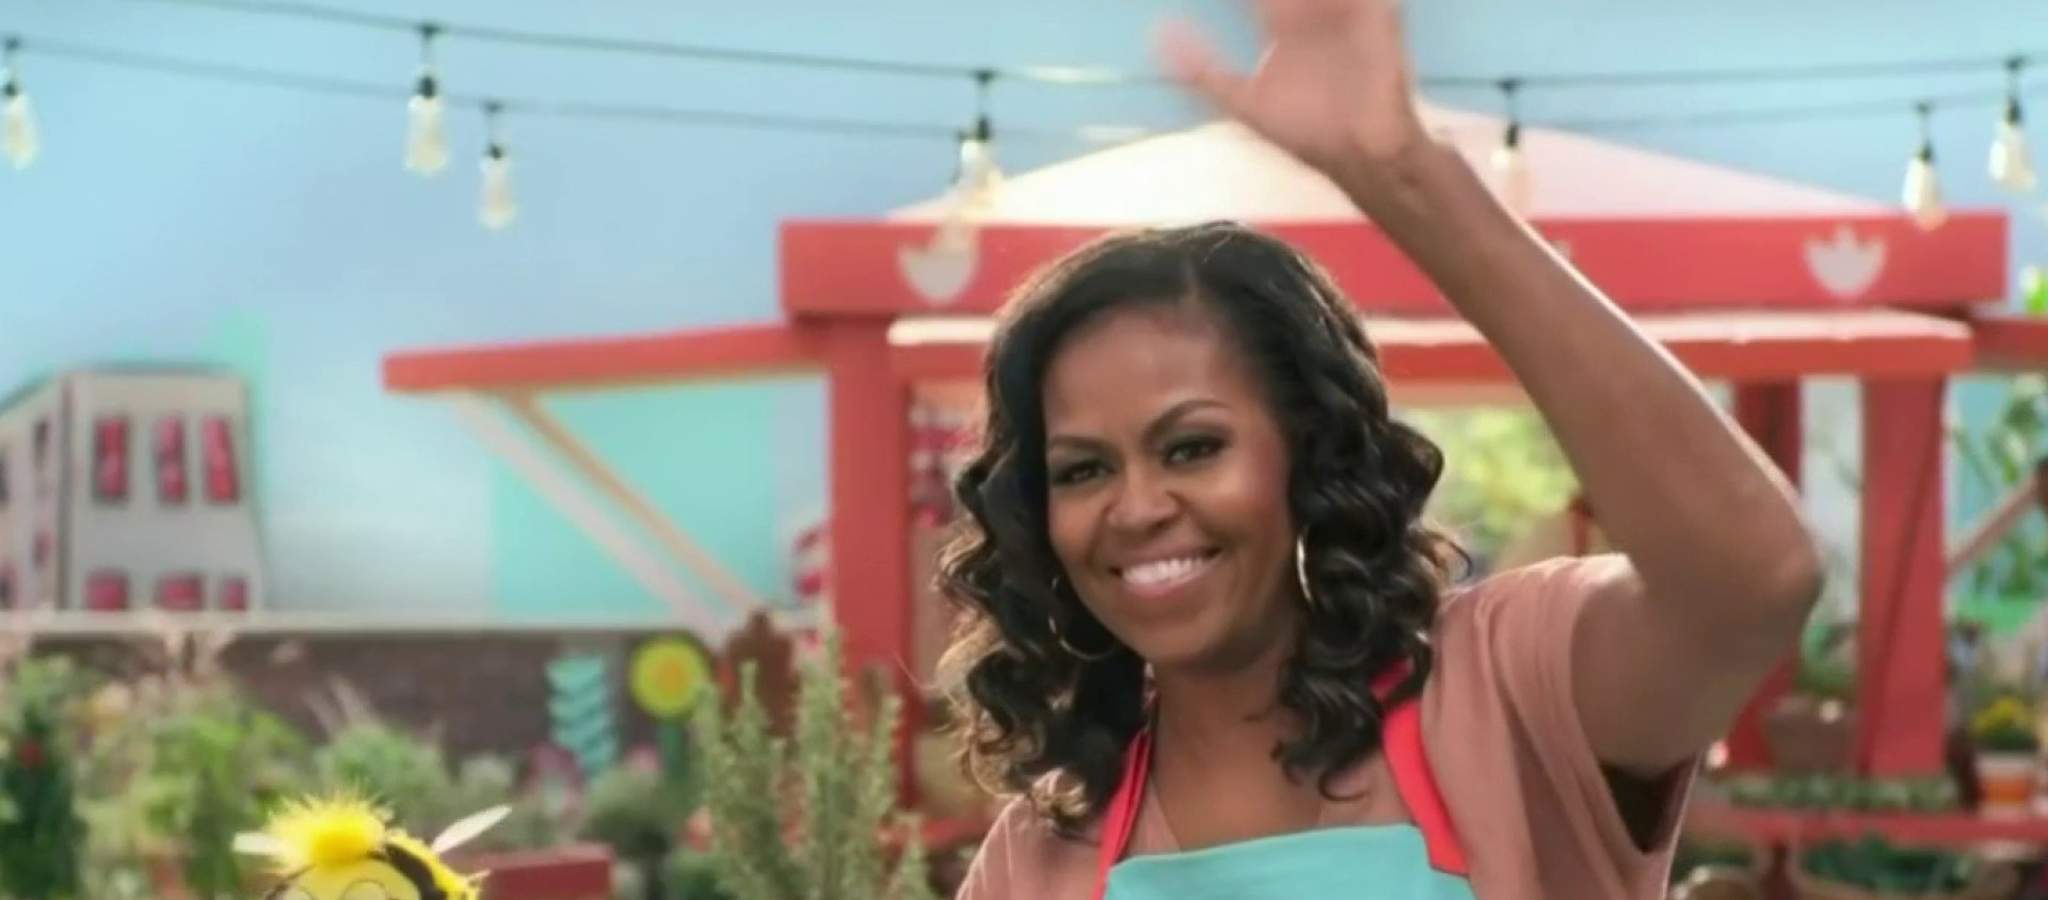 Michelle Obama steps up to host in new kid’s cooking show